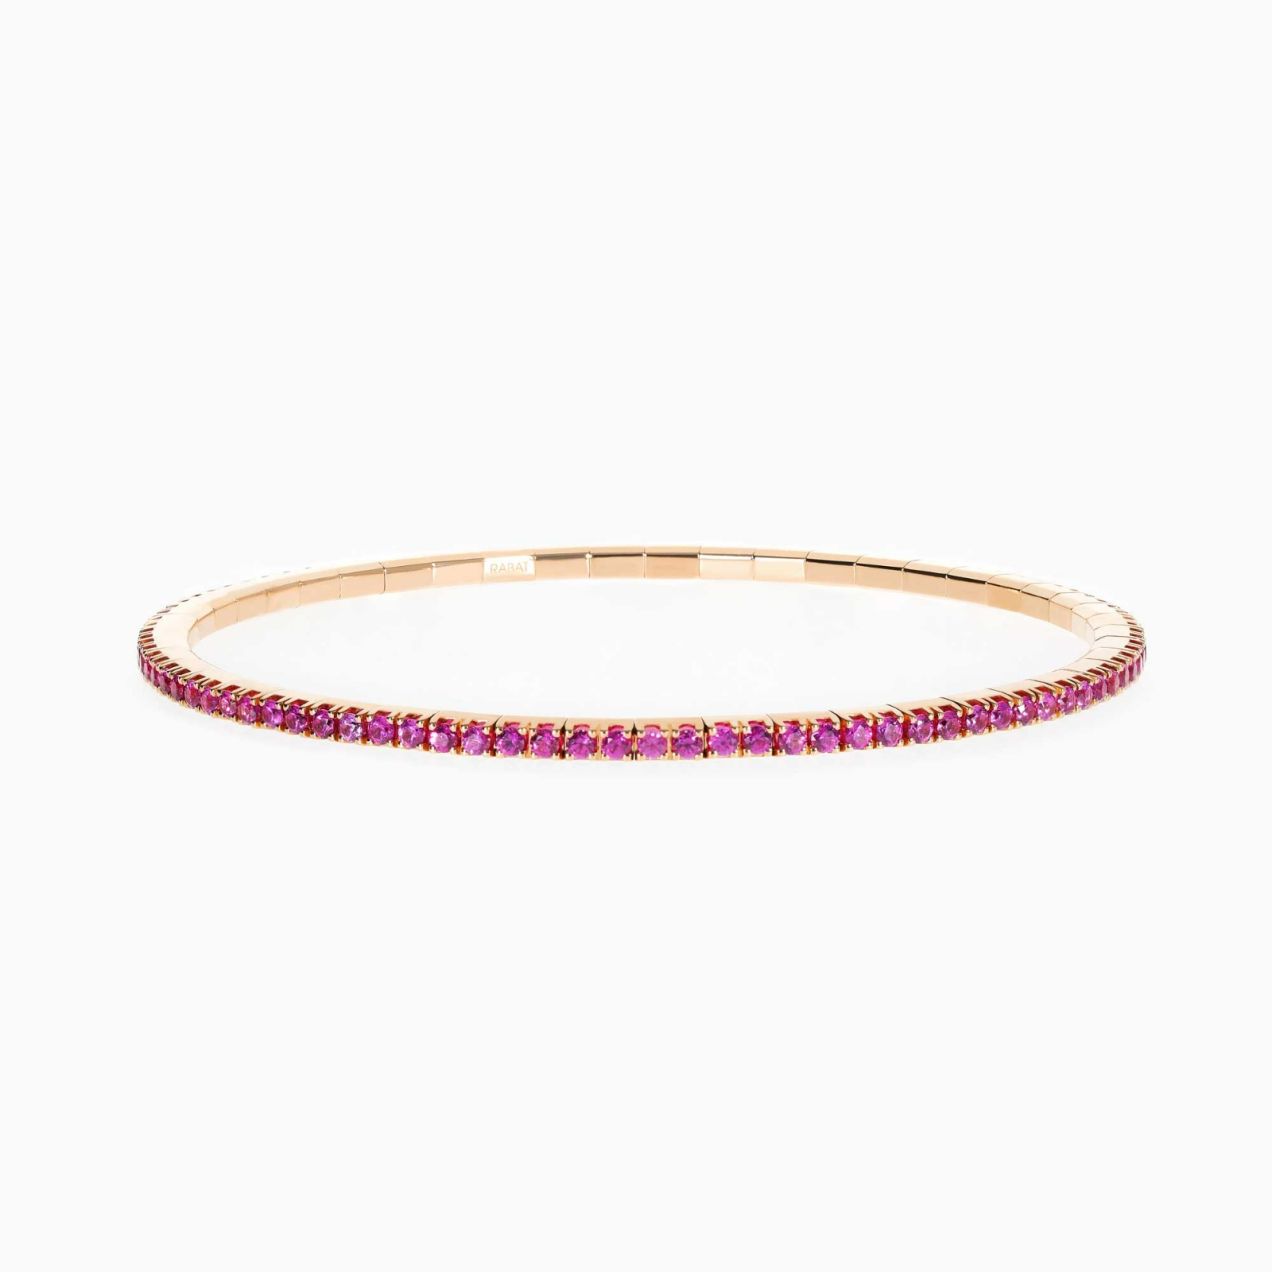 Rose gold riviere bracelet with brilliant-cut rubies